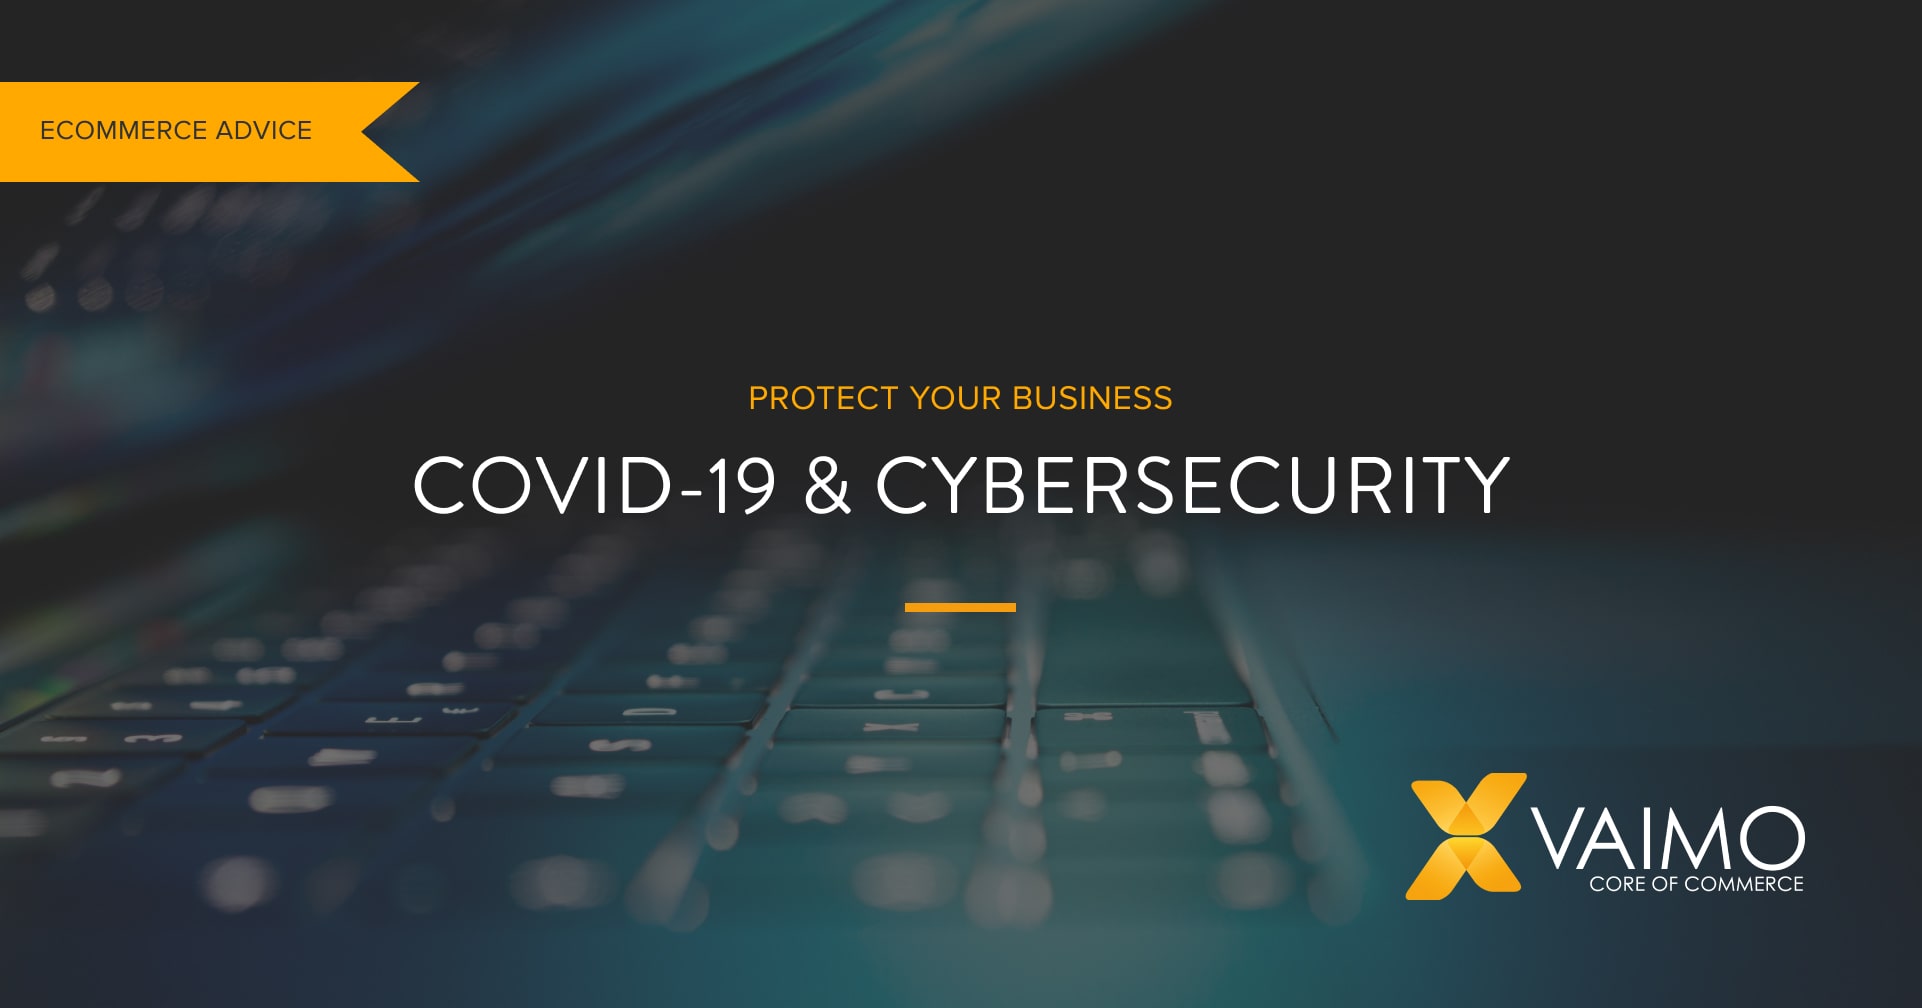 COVID-19 Cybersecurity